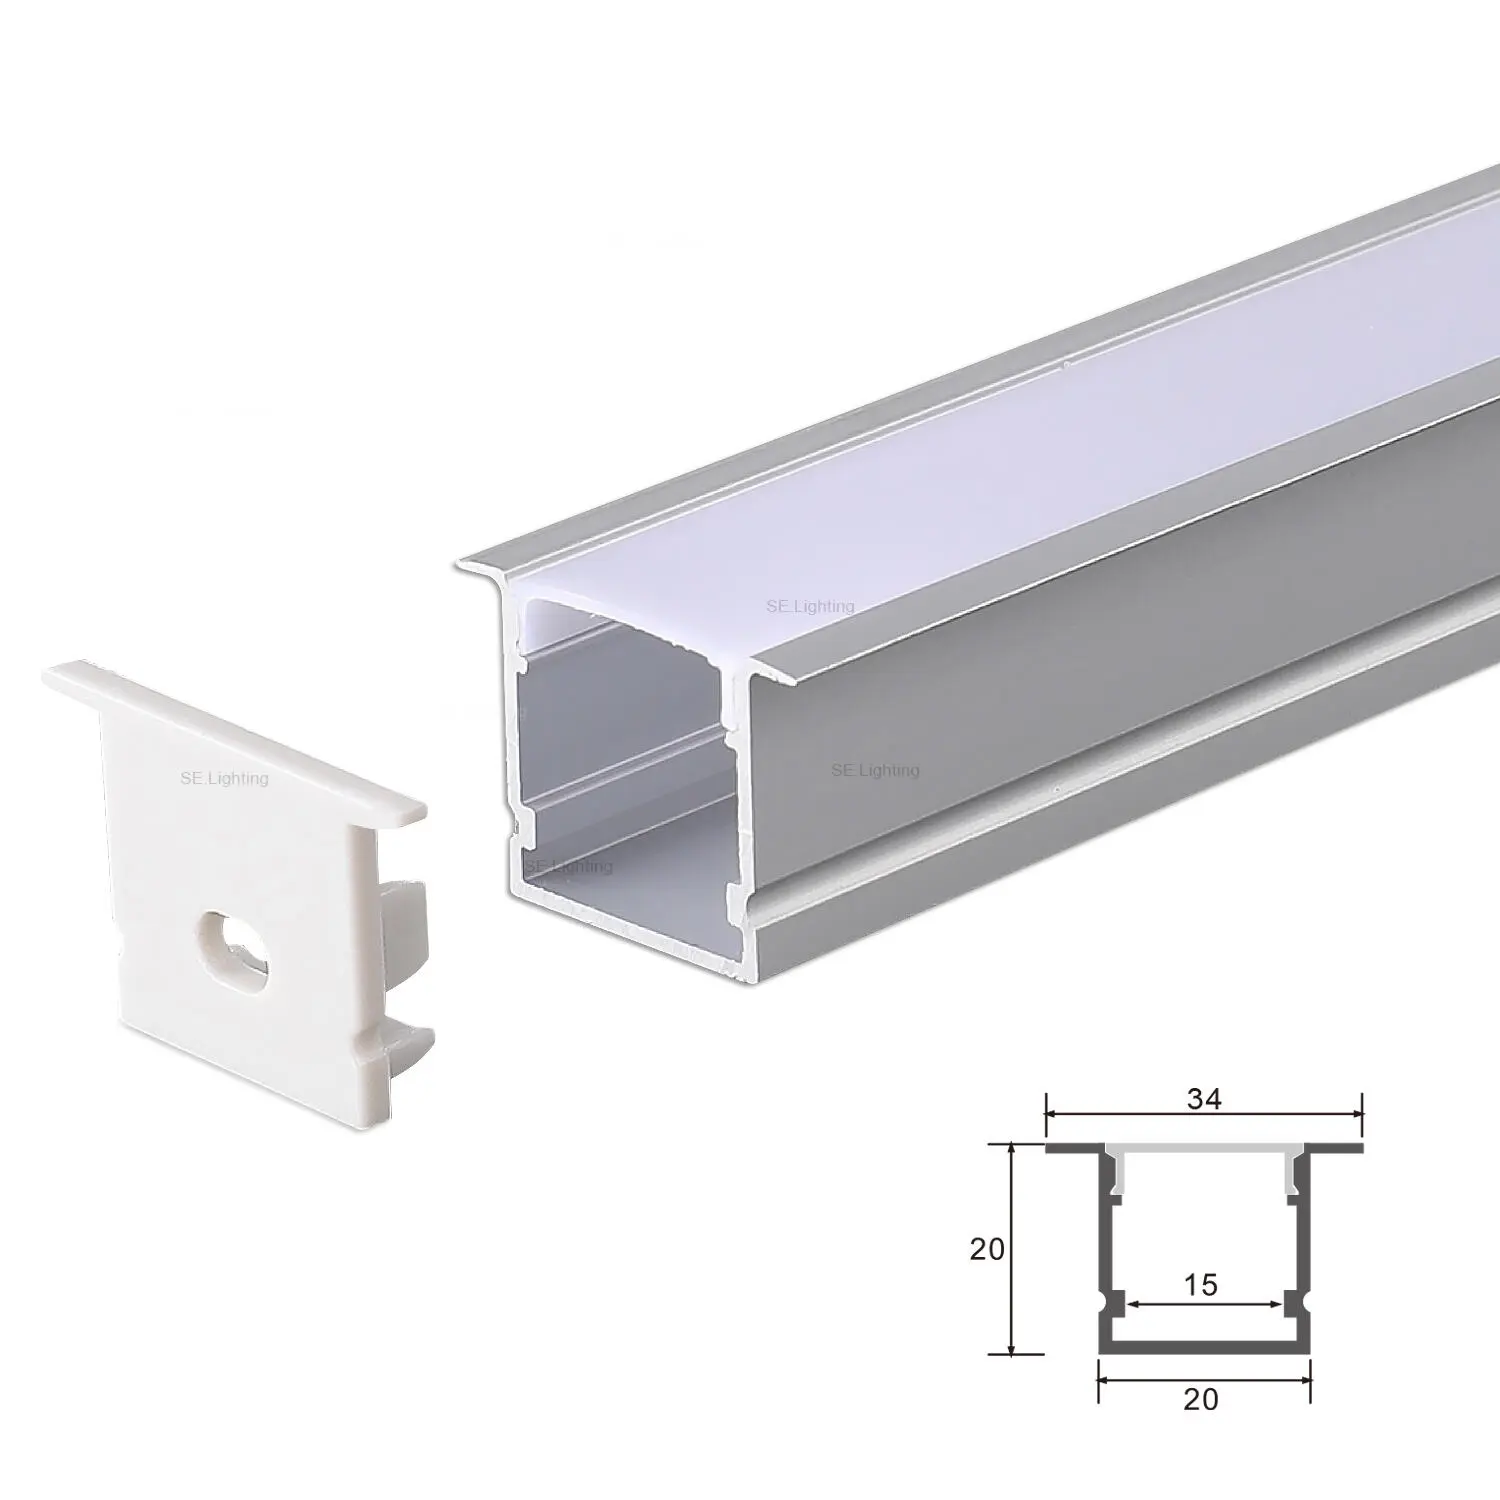 LED Light Strip Diffuser Channel 20x20mm Supplier